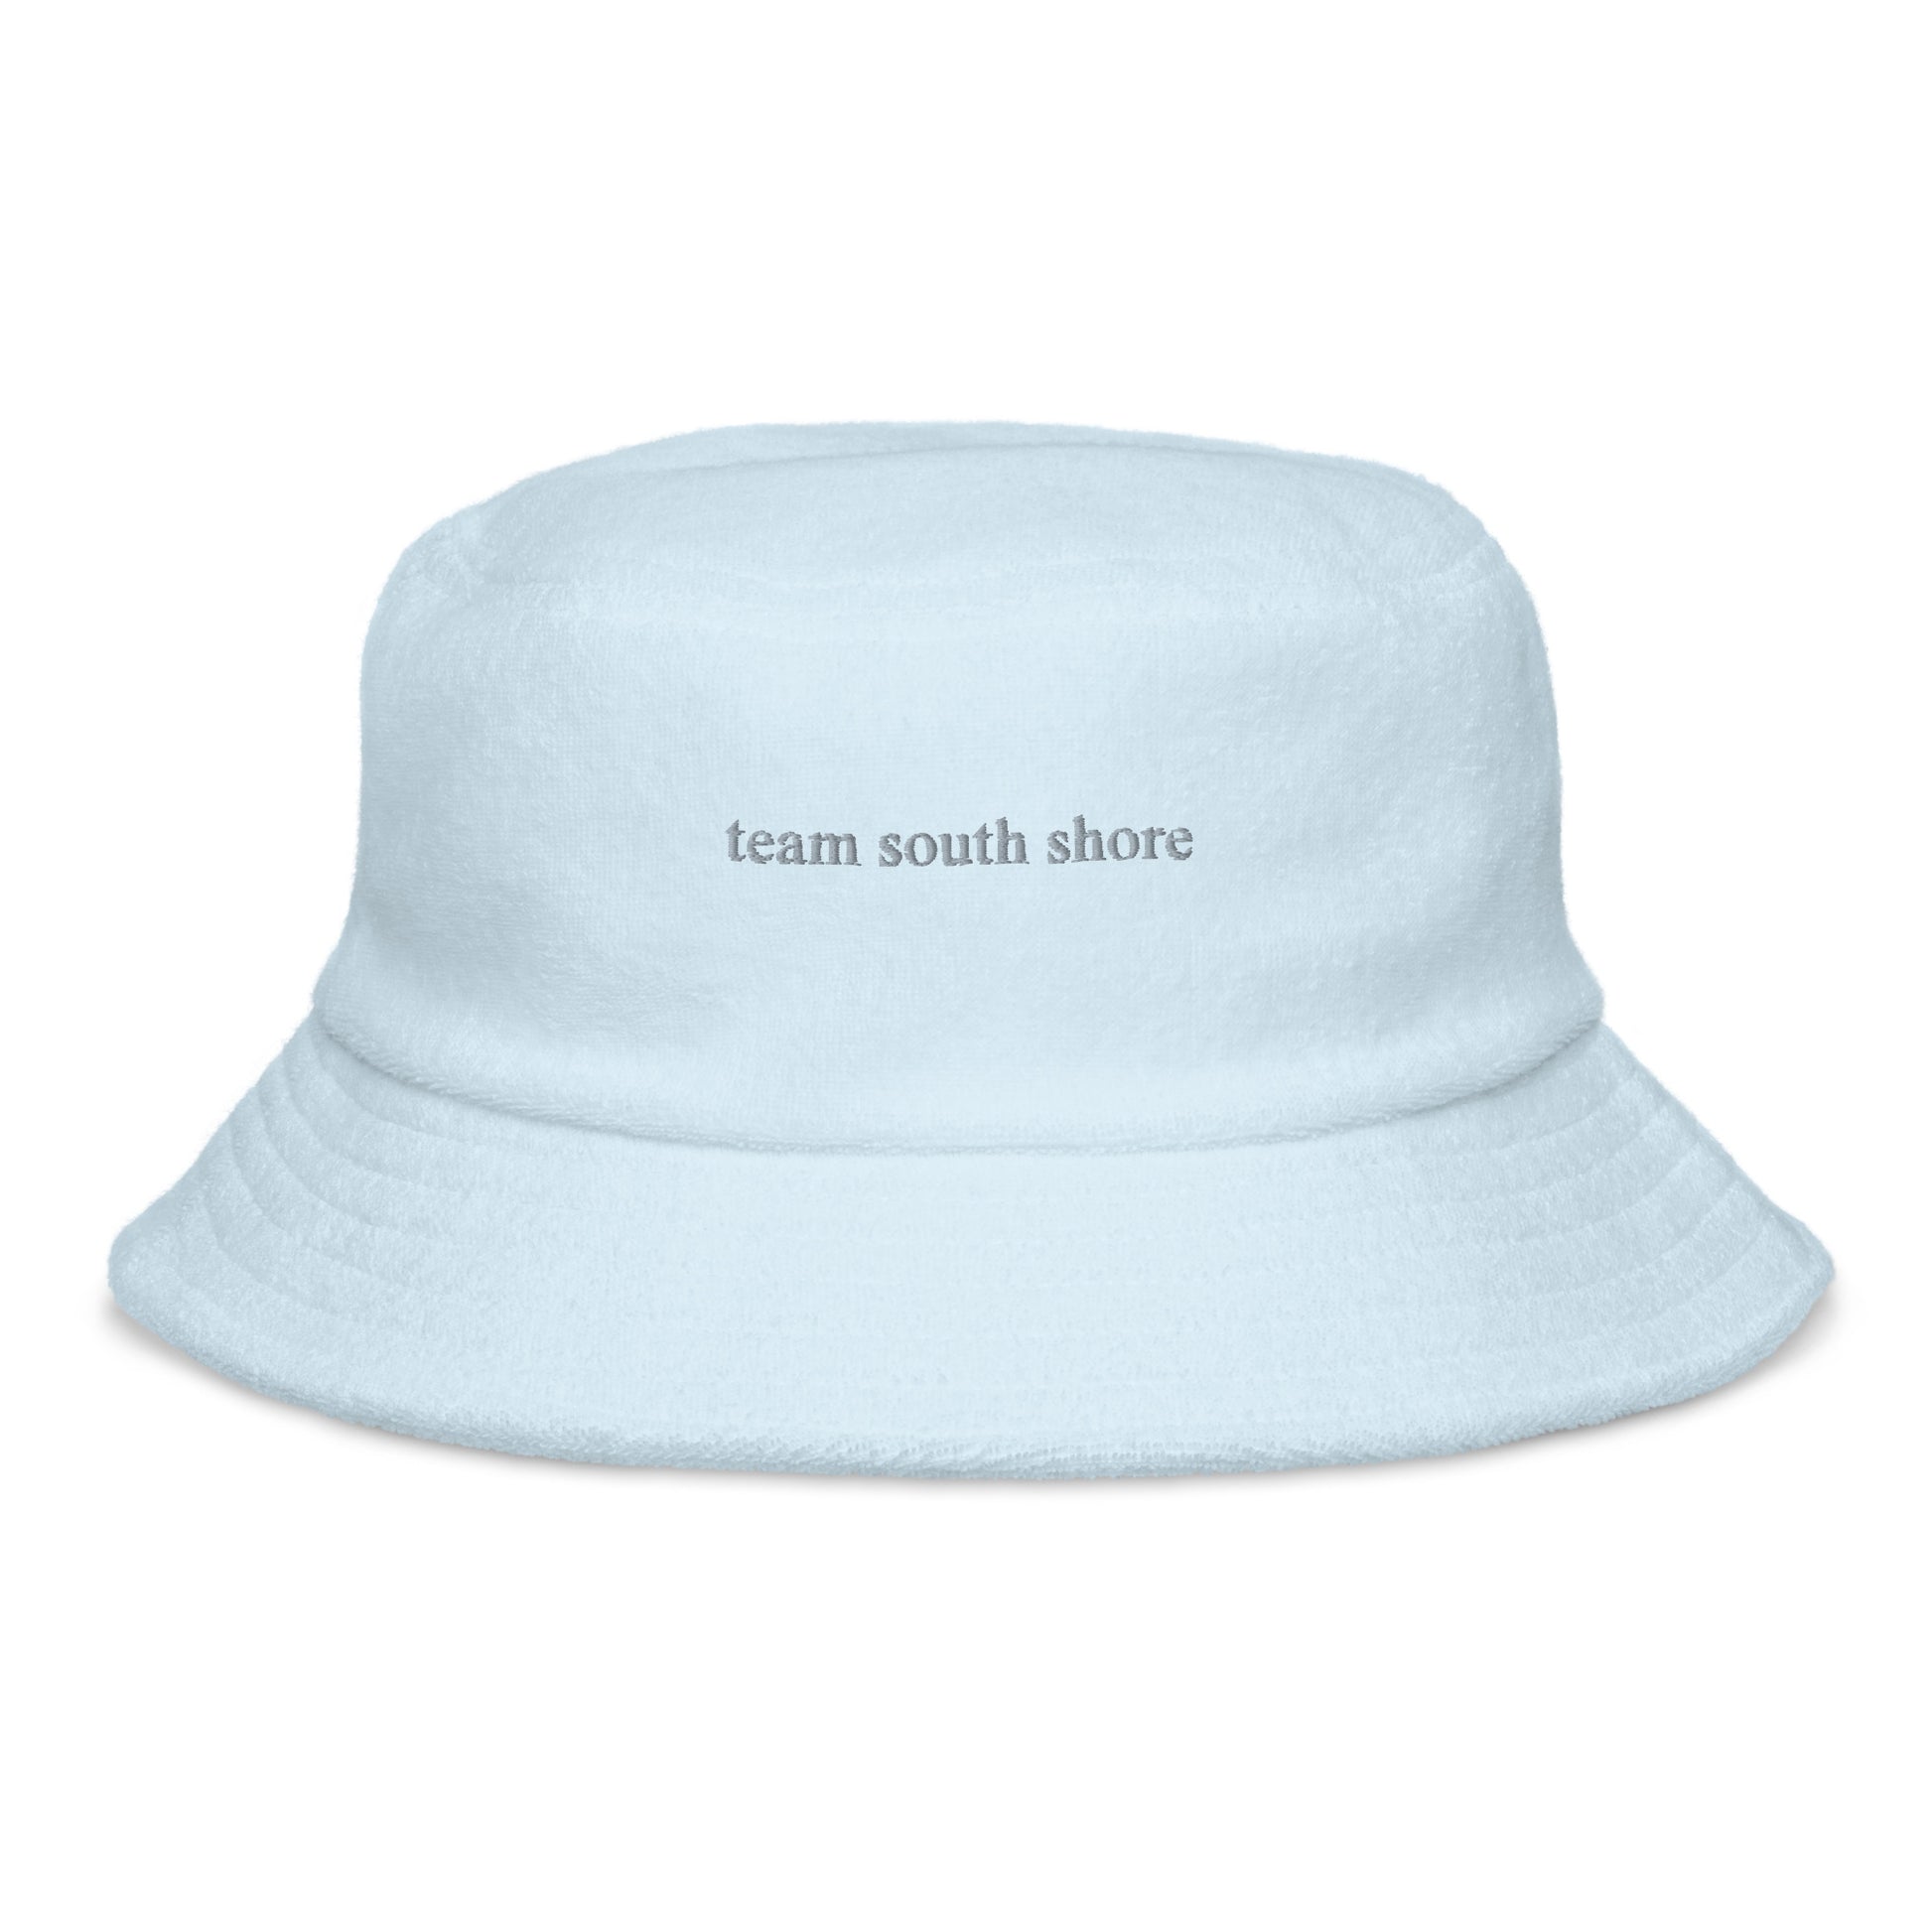 blue bucket hat that says "team south shore" in grey lettering